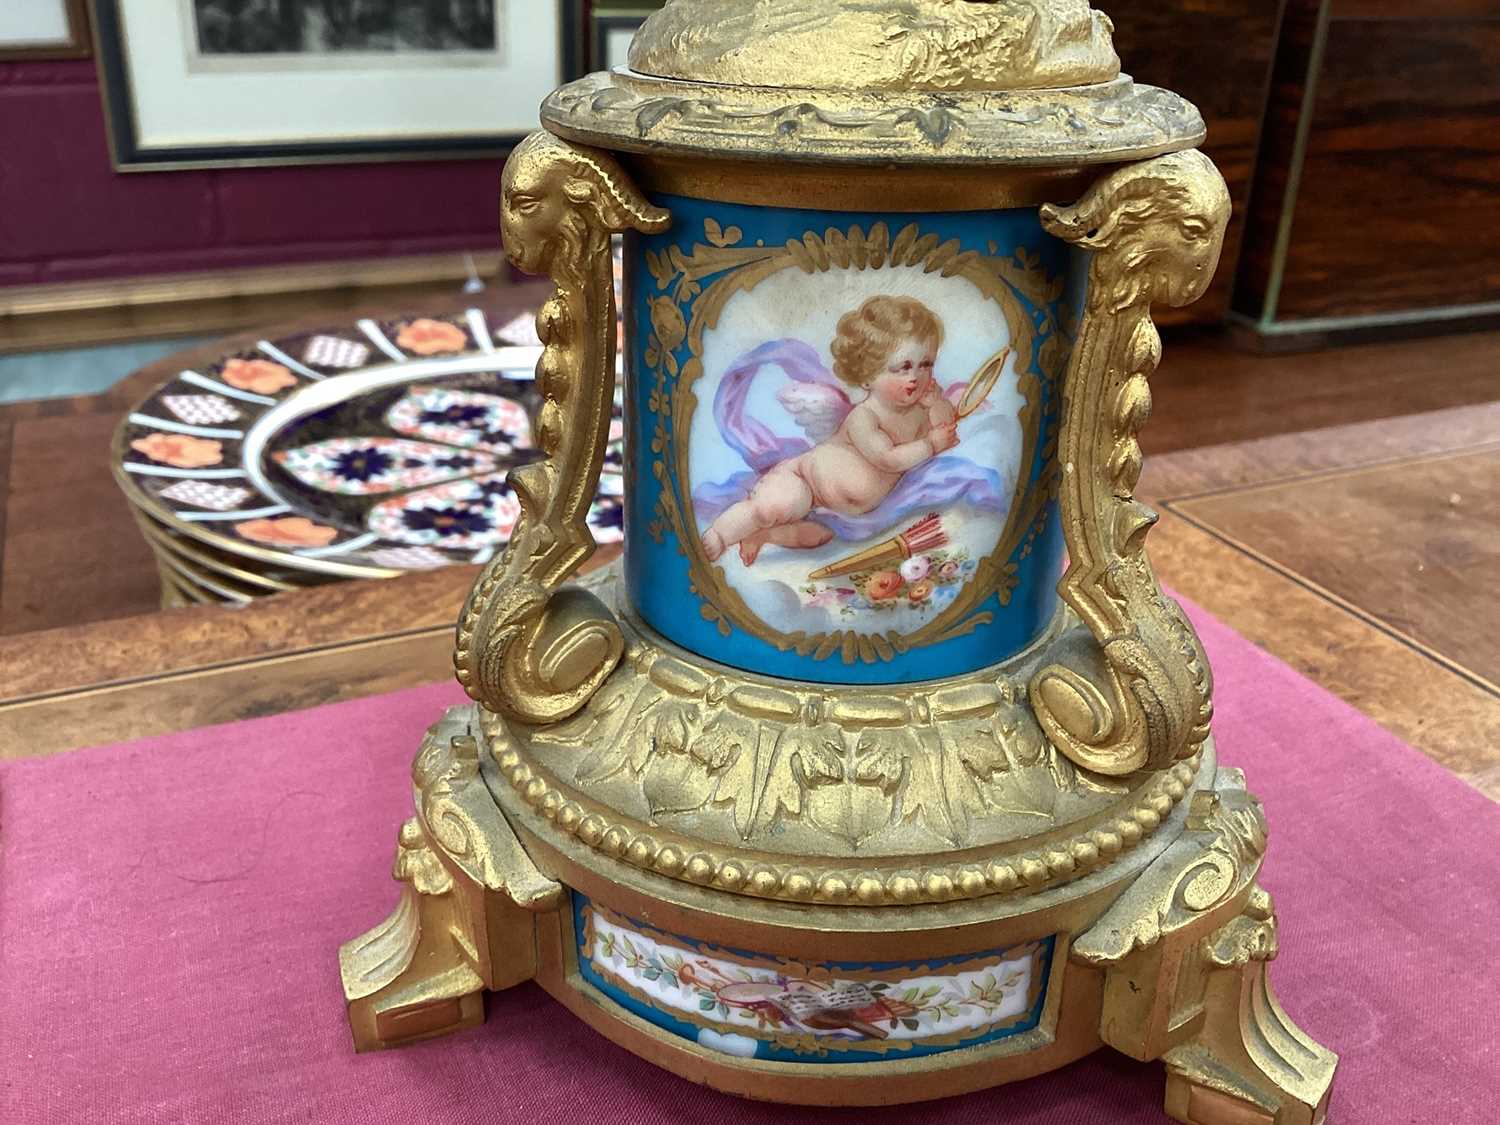 Fine quality large 19th century French ormolu clock garniture by Lerolle à Paris with Sèvres porcela - Image 18 of 26